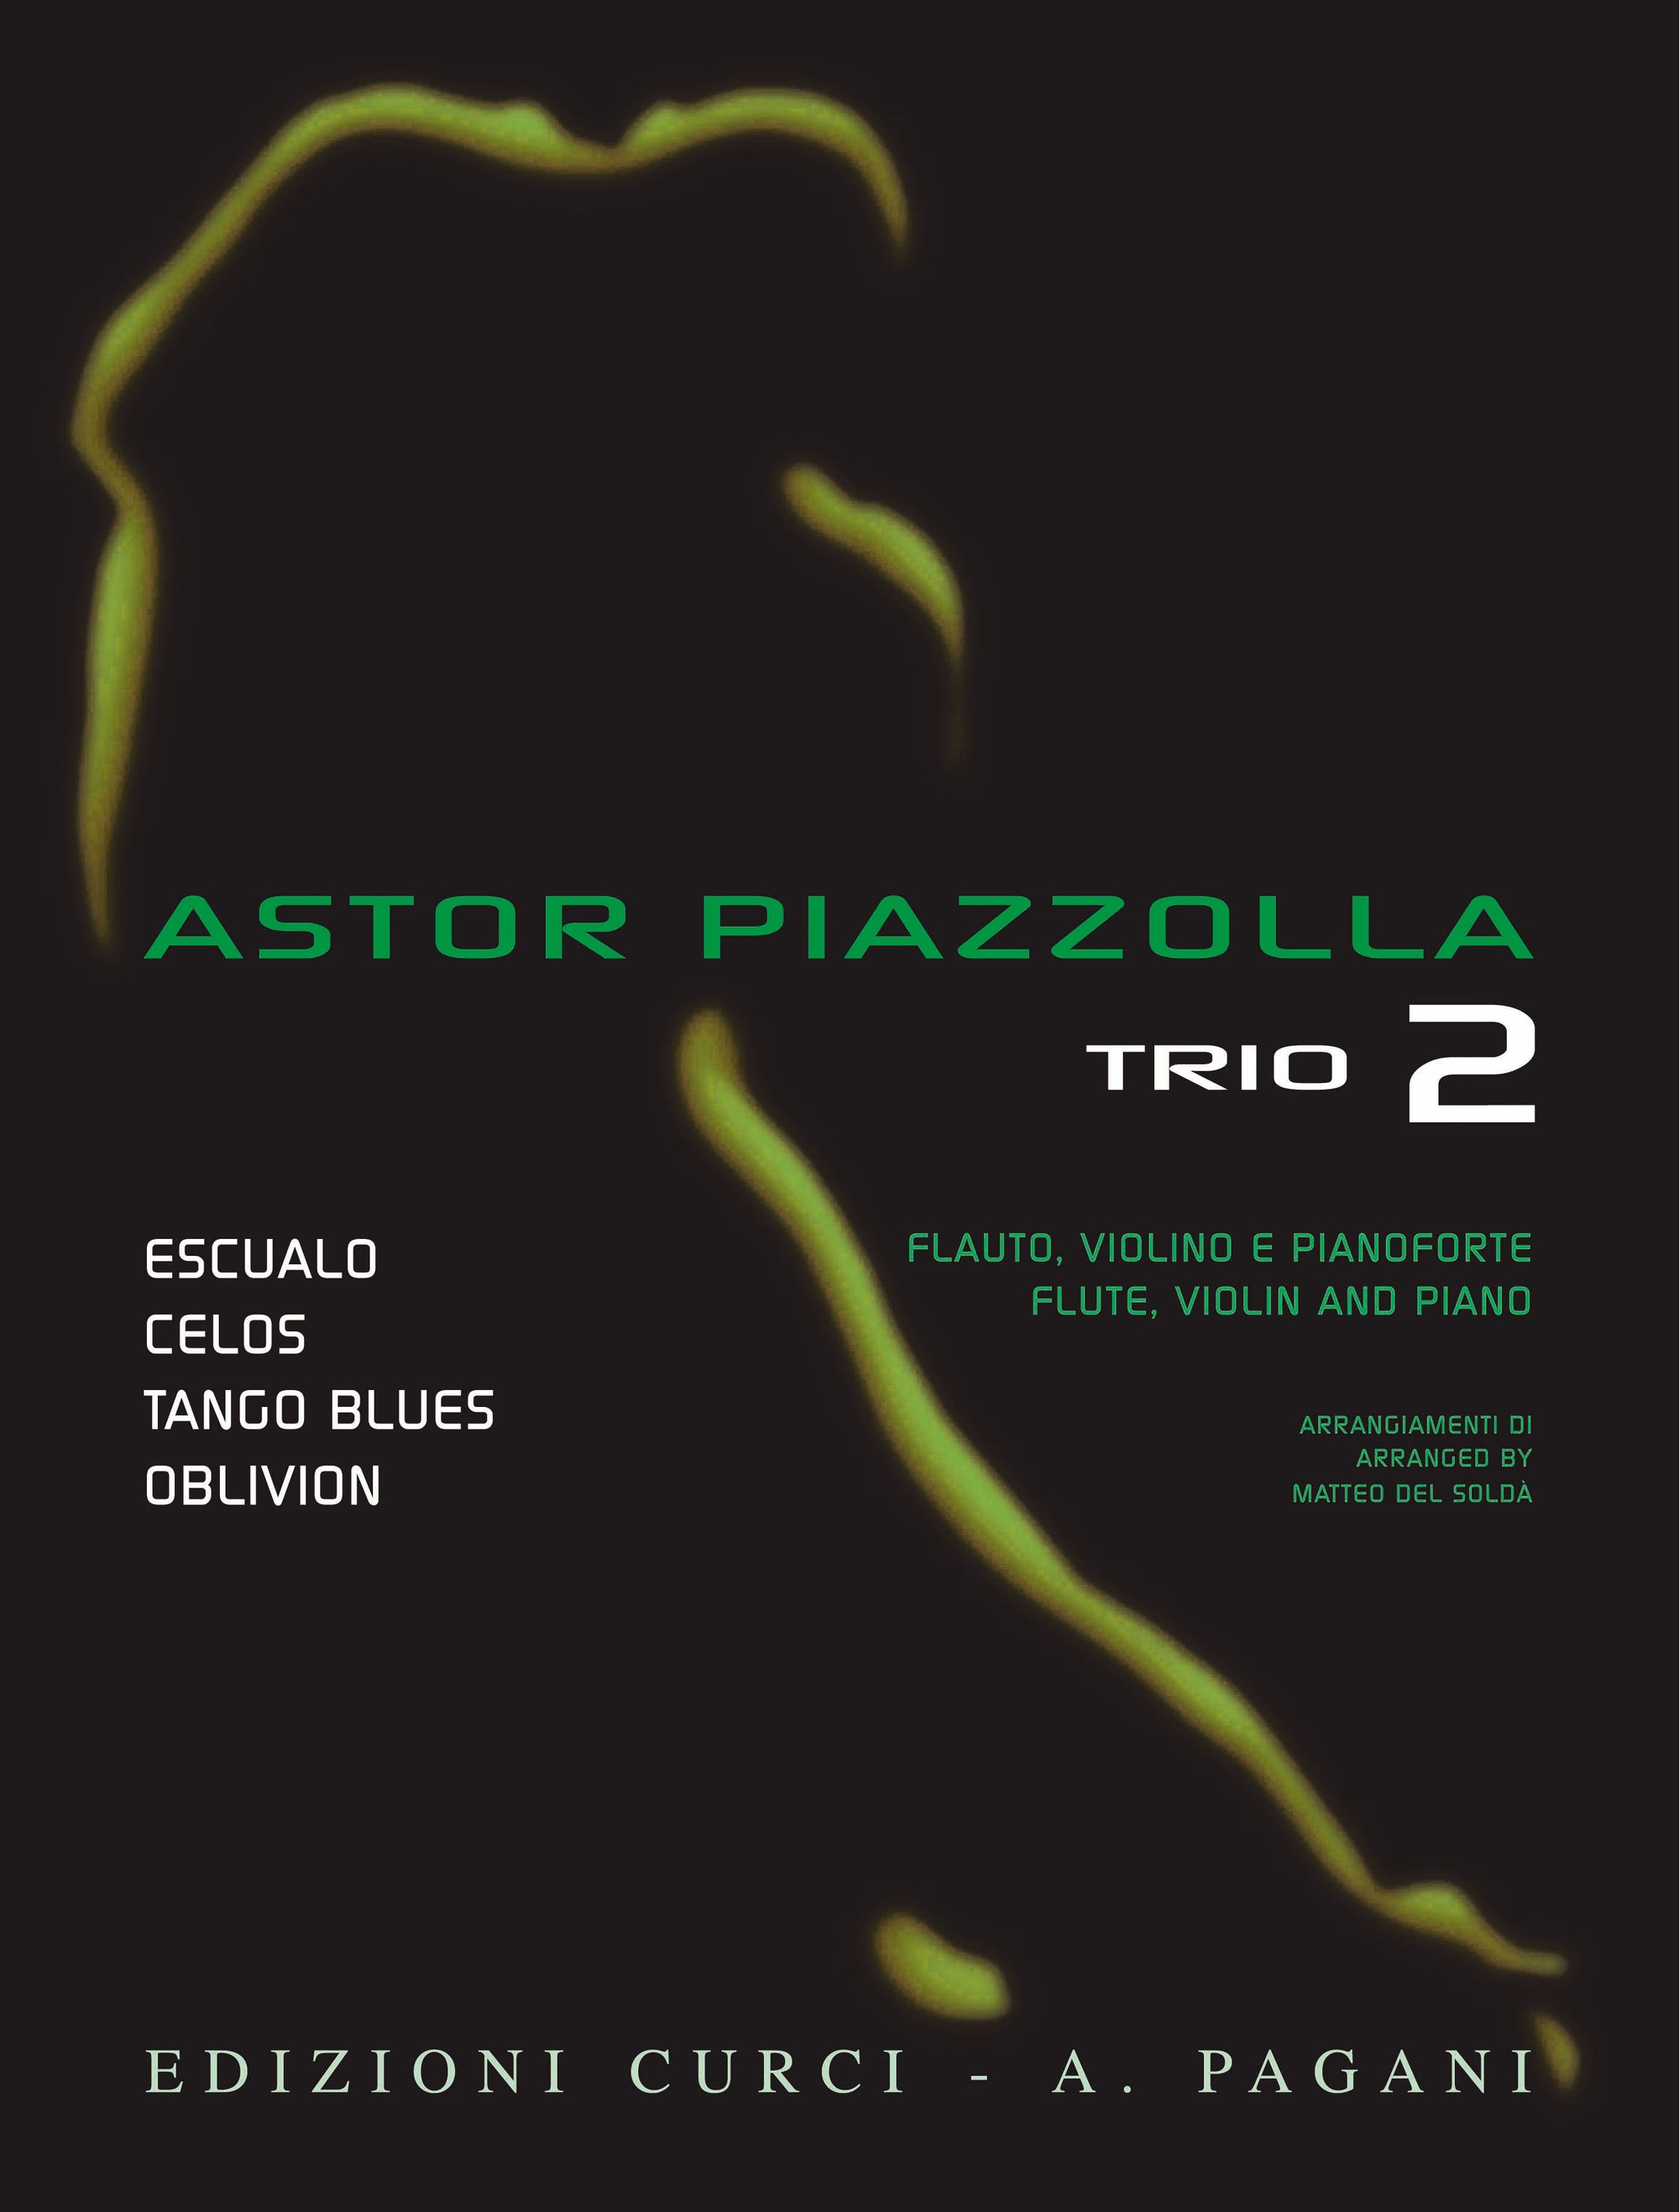 Piazzolla for Trio - Volume 2